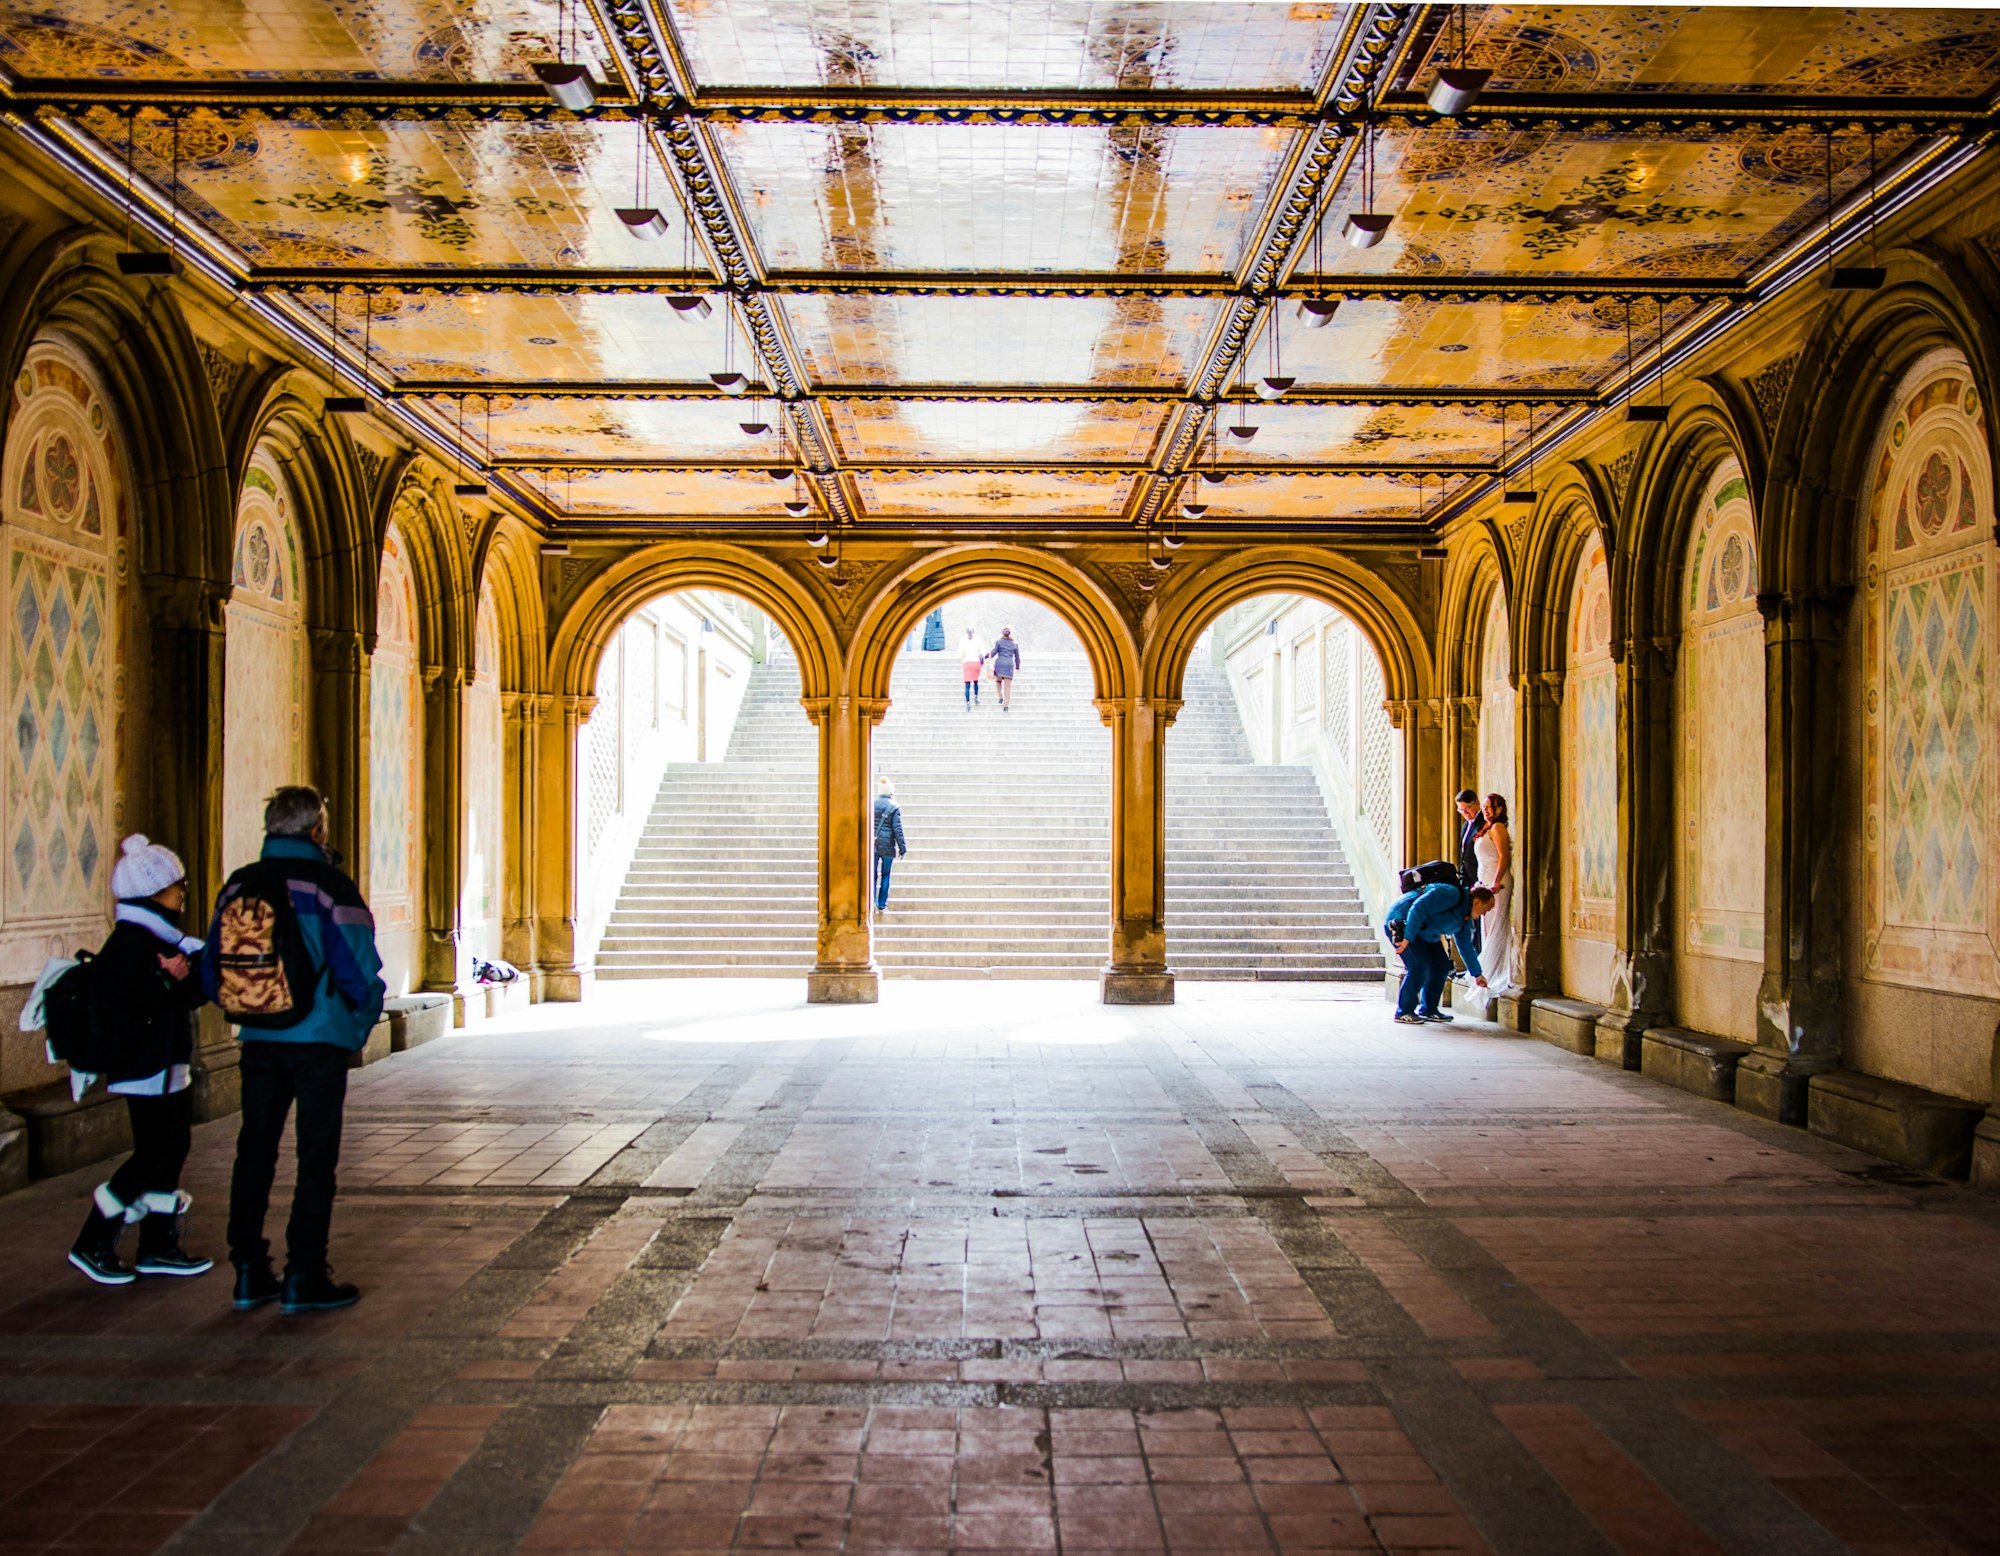 Bethesda Terrace is offering breathtaking views over the Central Park and the woods.